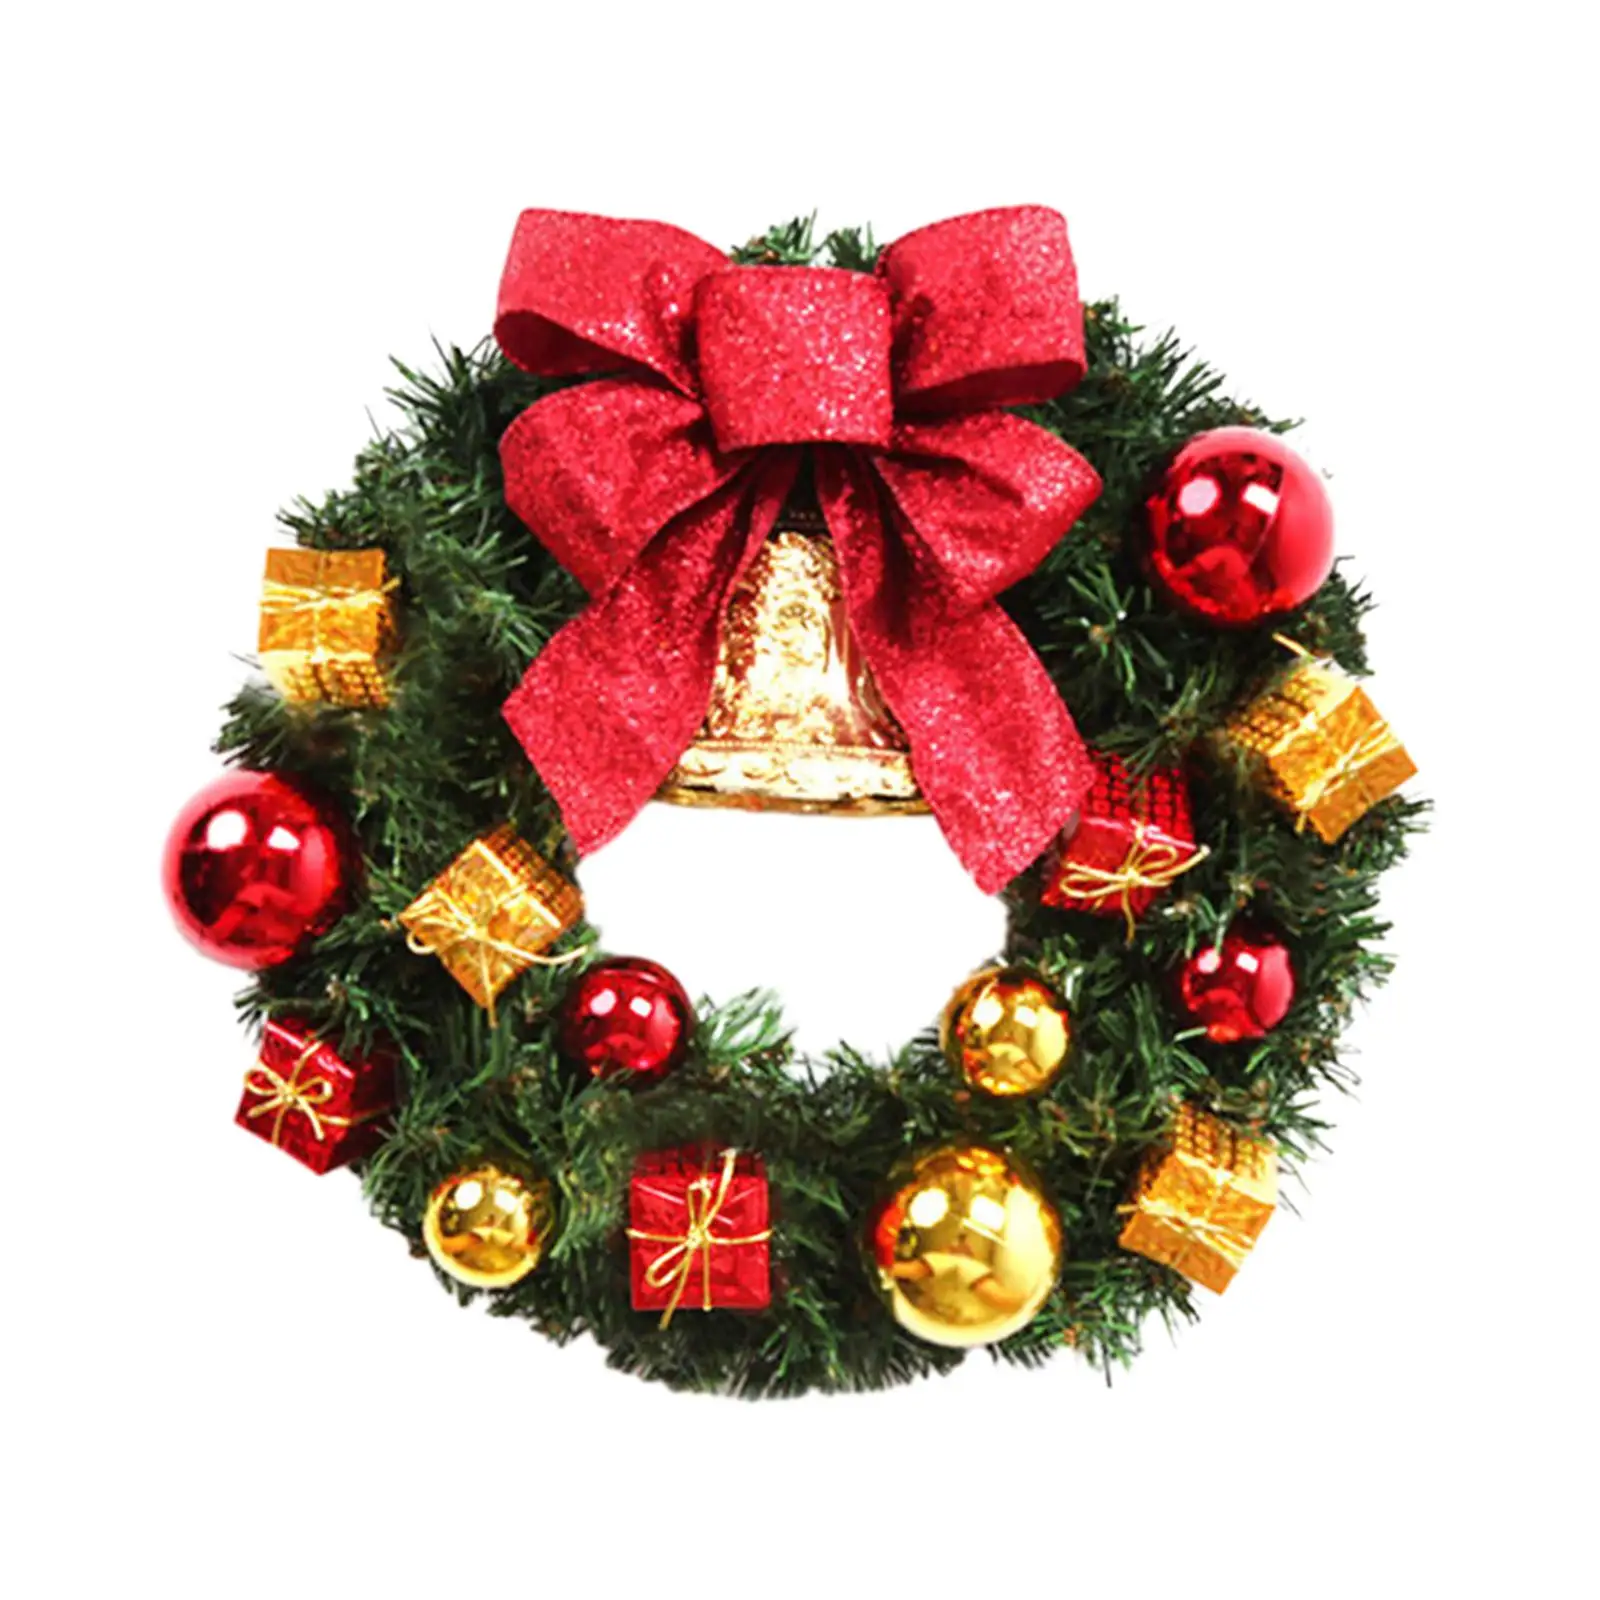 Artificial Christmas Wreath Outside Holiday Garland for Festival Hotel Porch